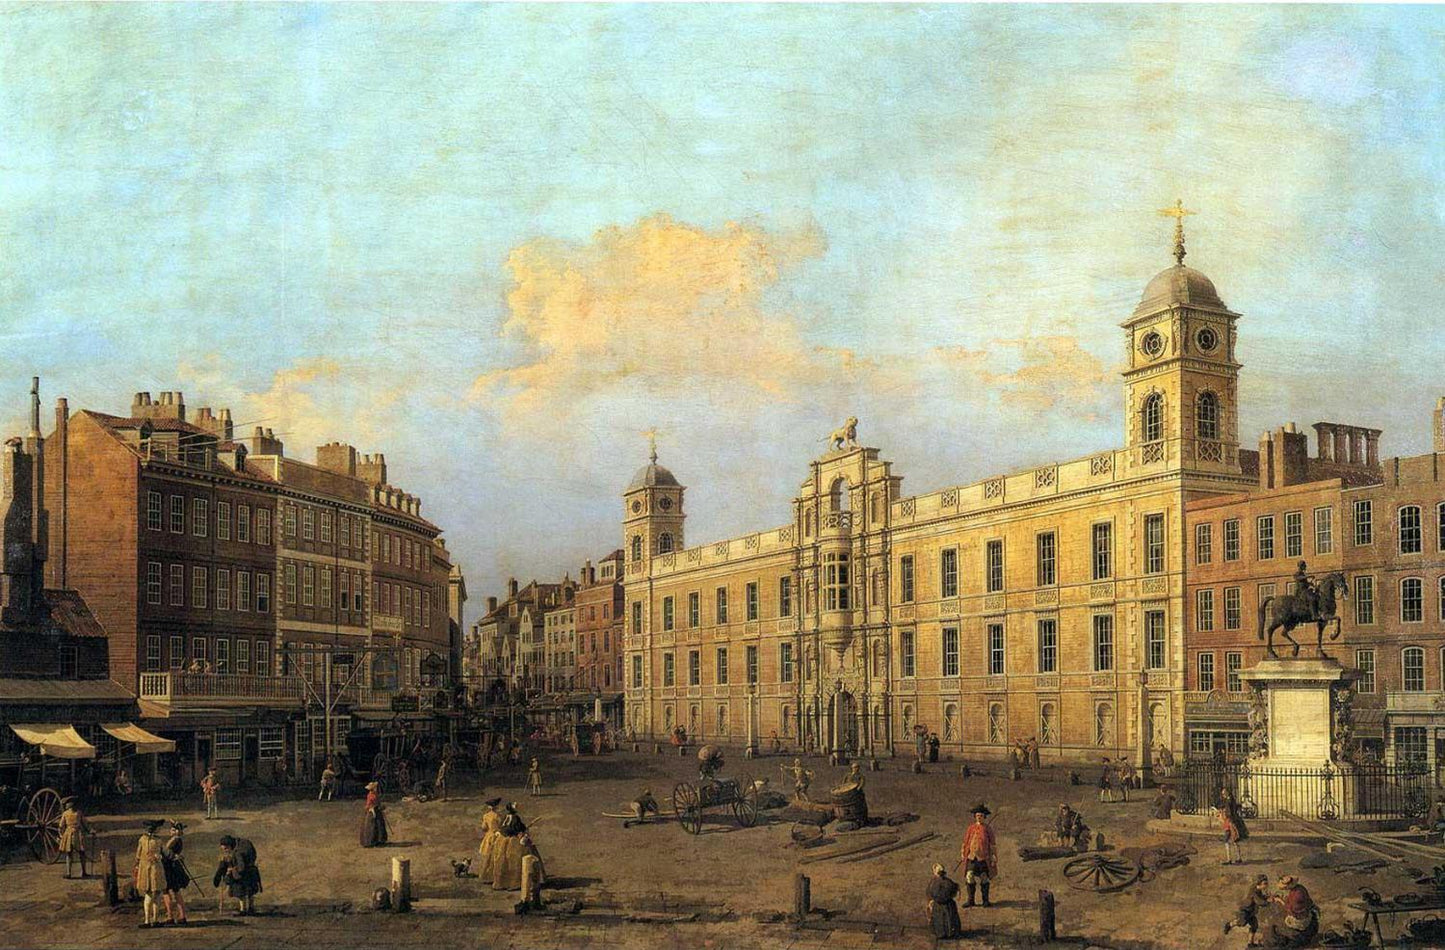 Northumberland House in London, 1752, Canaletto